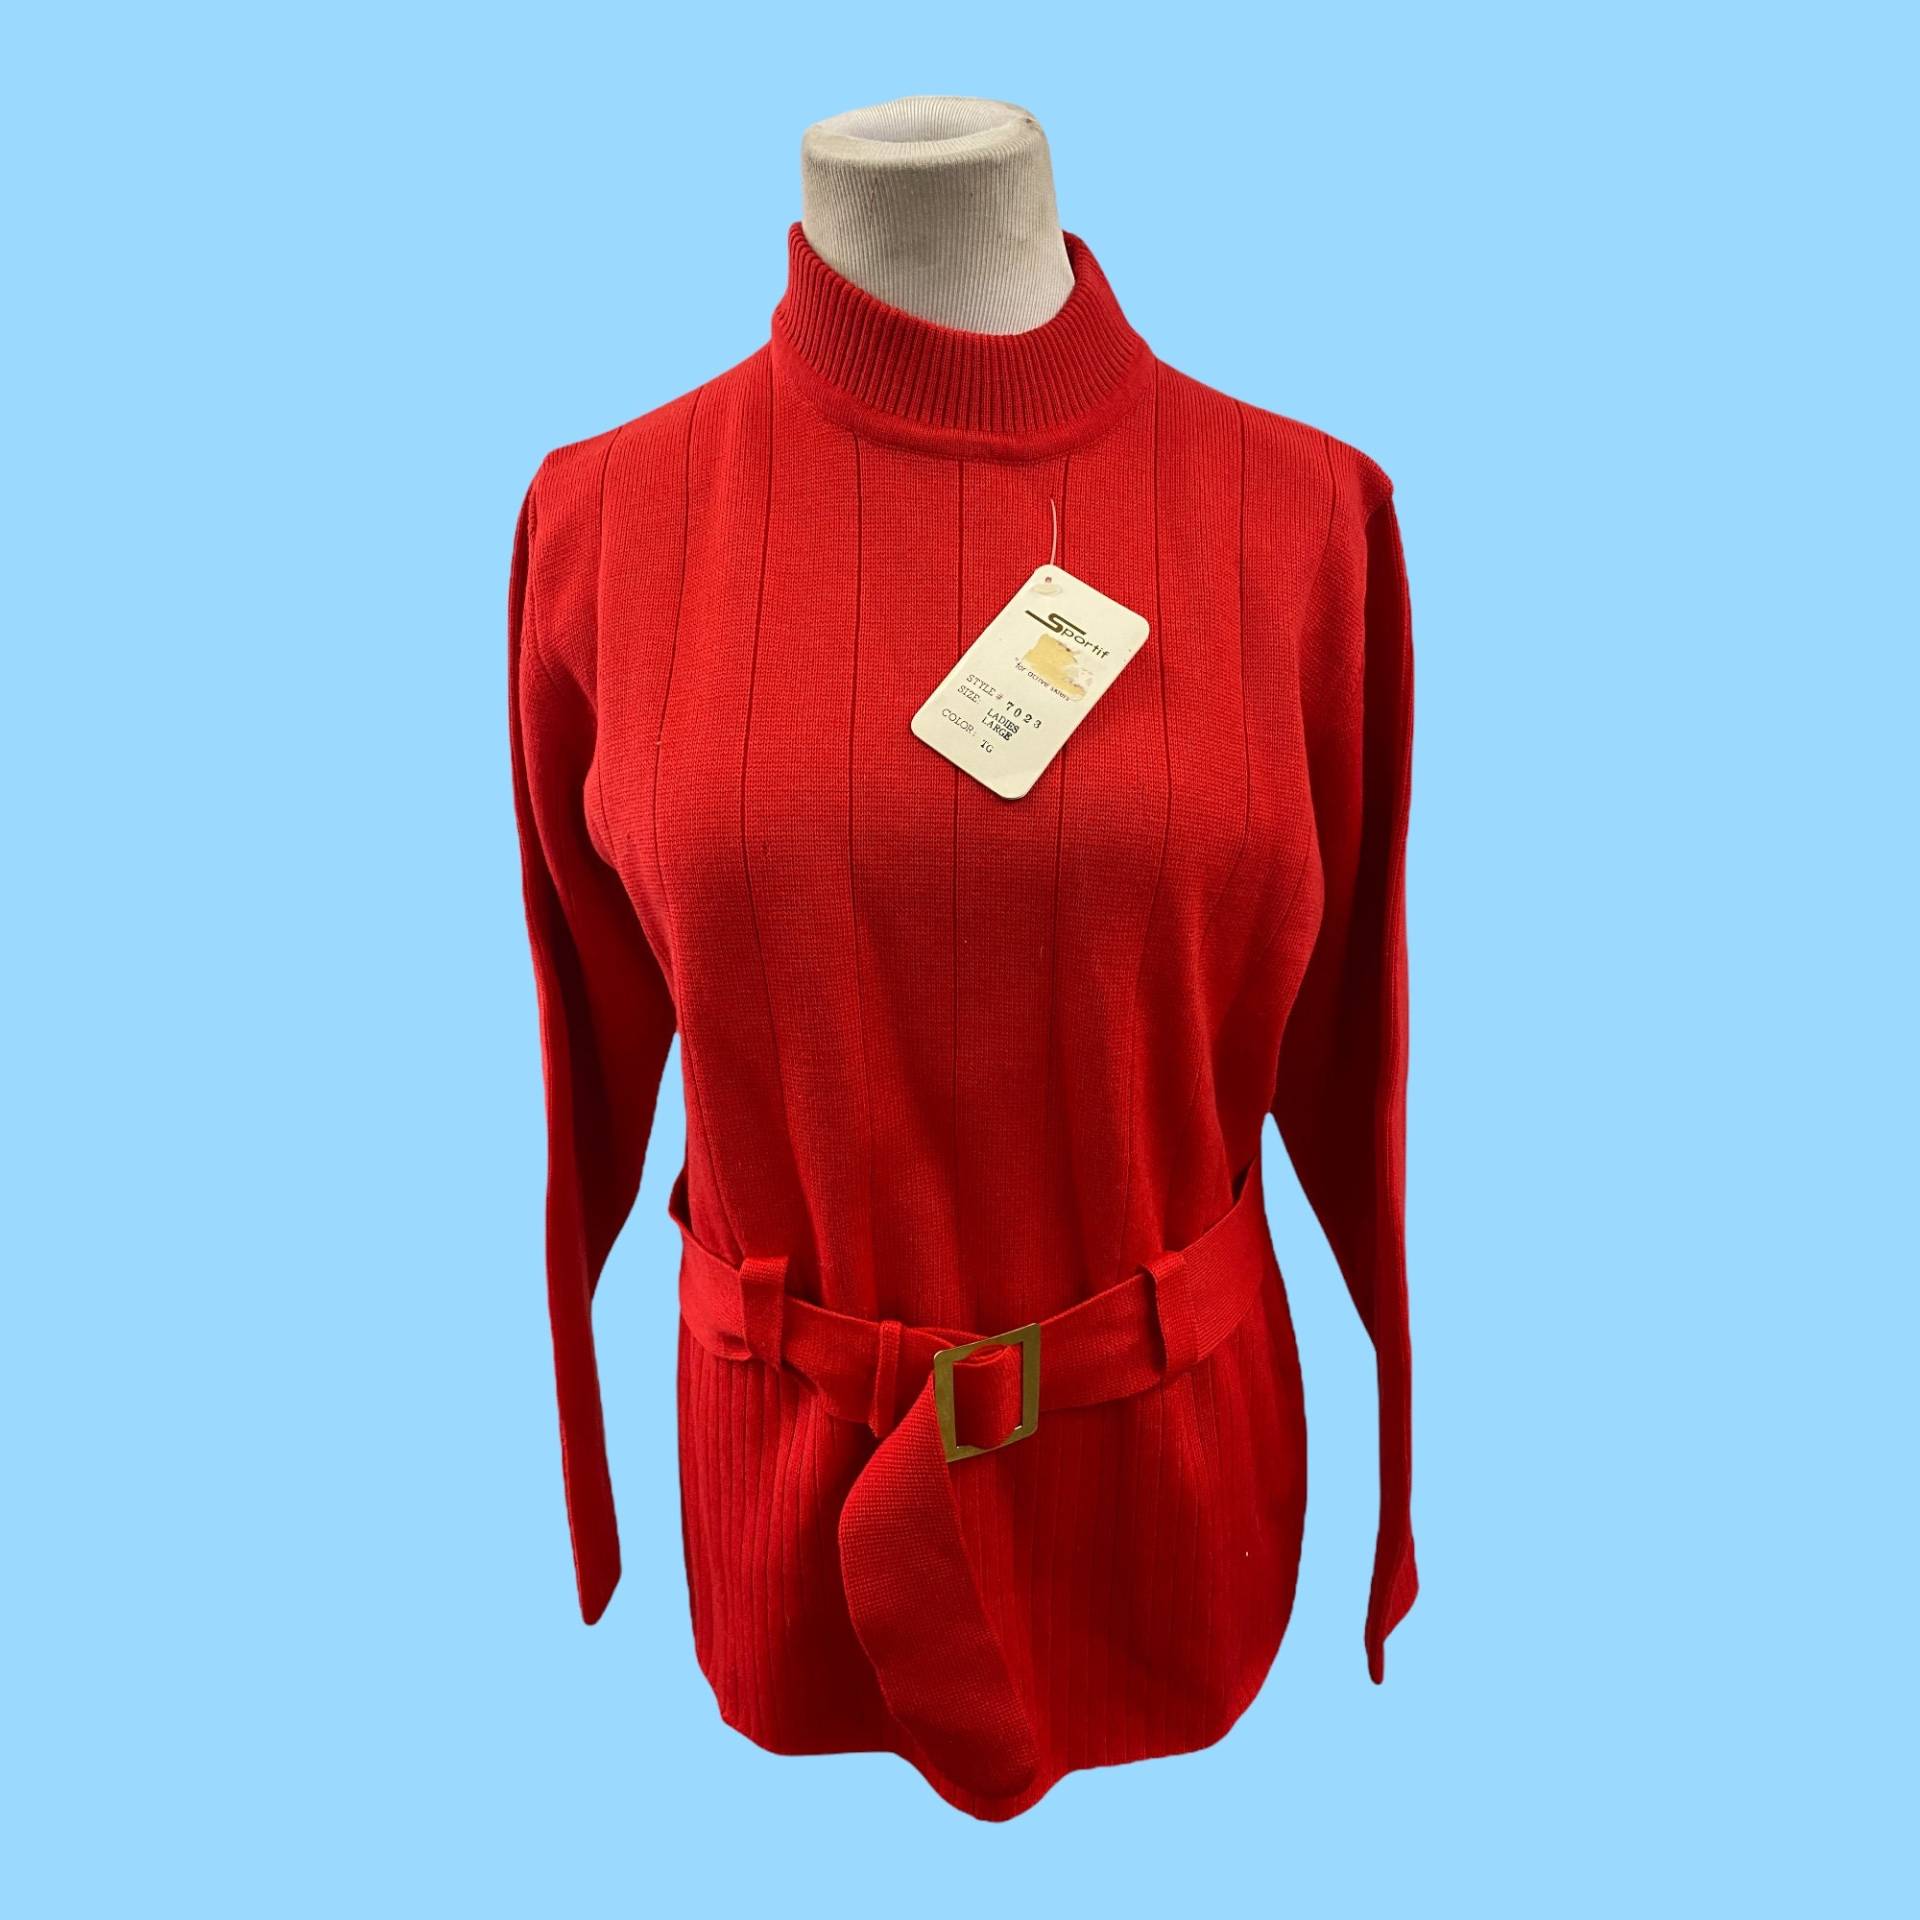 Vintage 1970 Frau's Red Sportif Wolle Ski Top Large New Old Stock von StevesVintageClothes